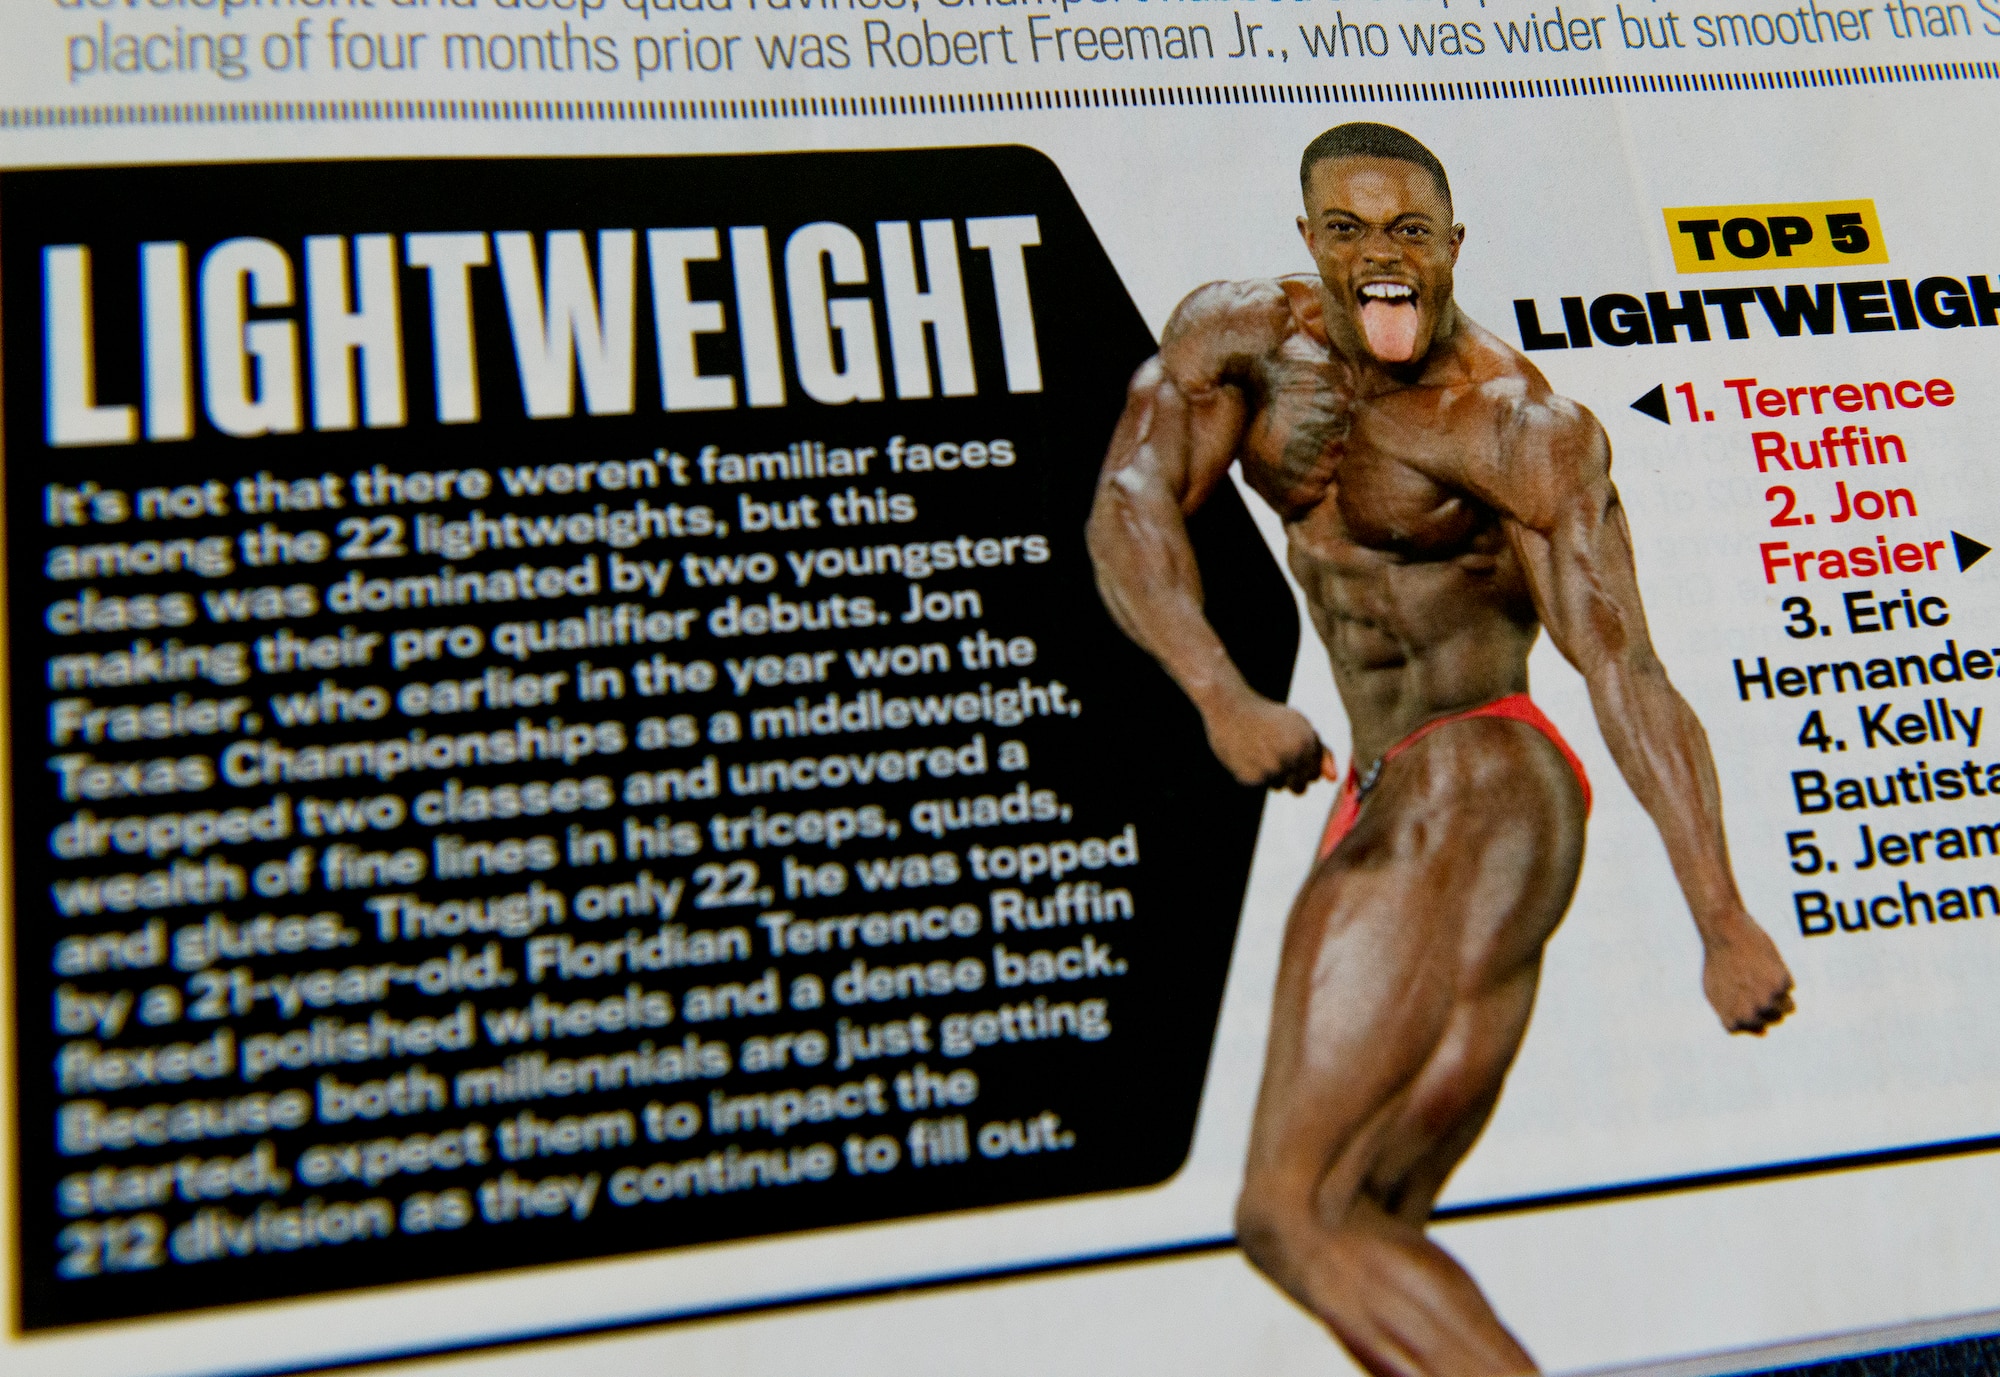 Senior Airman Terrence Ruffin, 16th Electronic Warfare Squadron, reviews an issue of "Flex" magazine featuring a write up about his success at a young age.  In November, the Airman became the youngest professional bodybuilder on the circuit at age 21.  (U.S. Air Force photo/Samuel King Jr.)